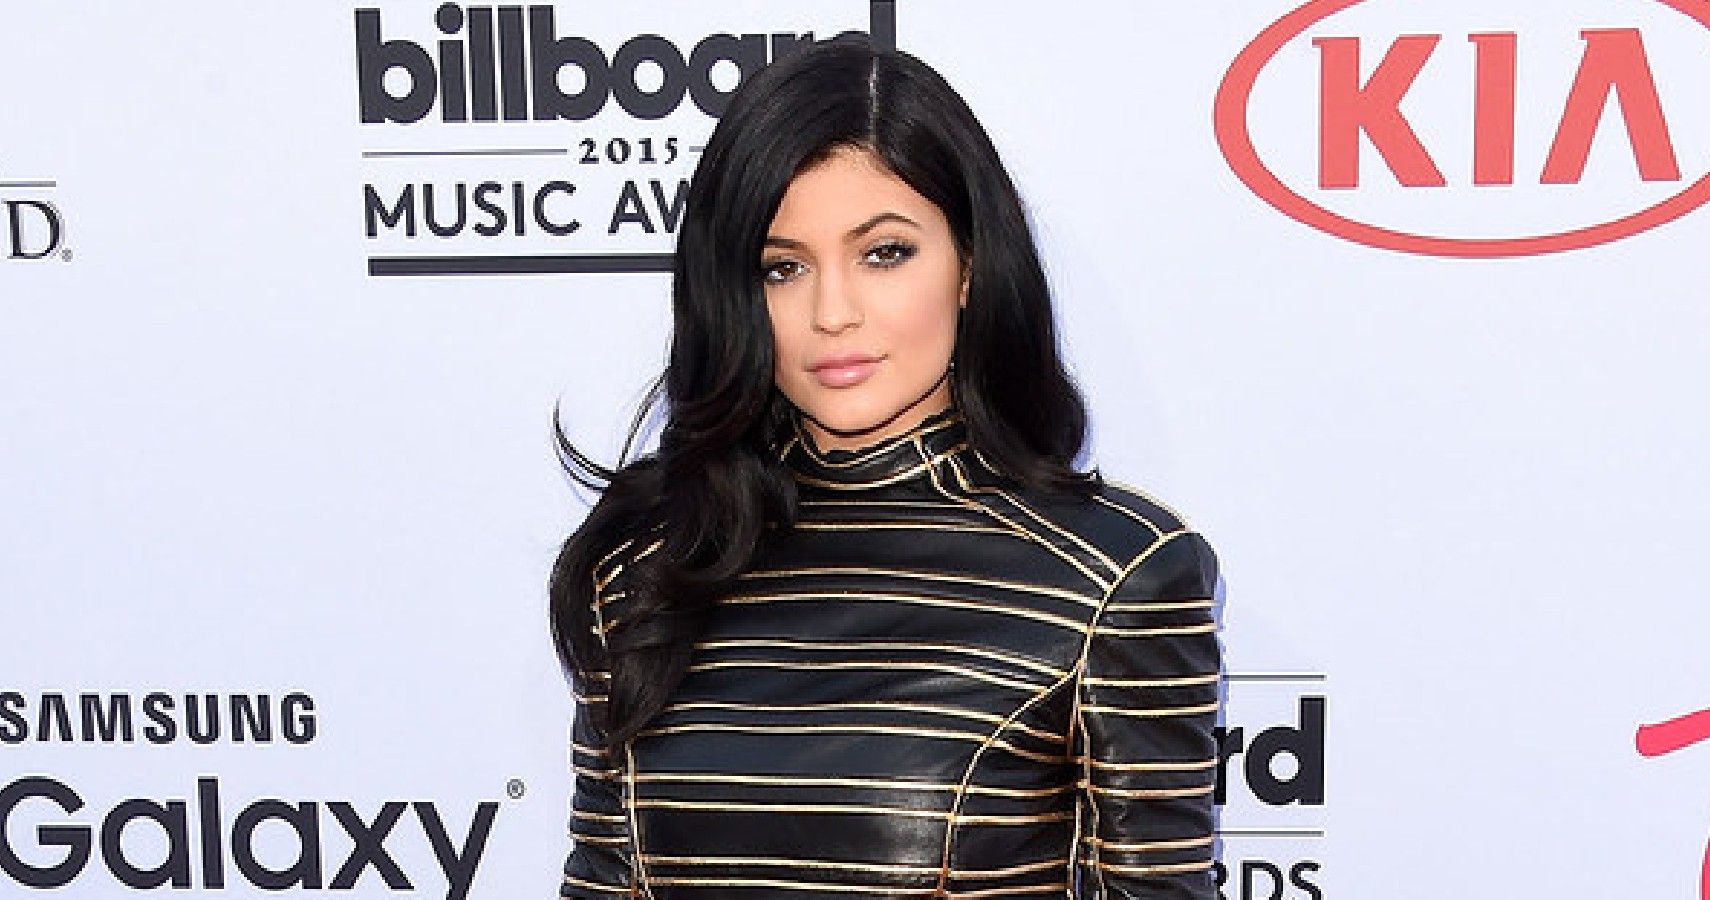 Kylie Jenner's Freddy Krueger Cosmetic Collection Is Scary